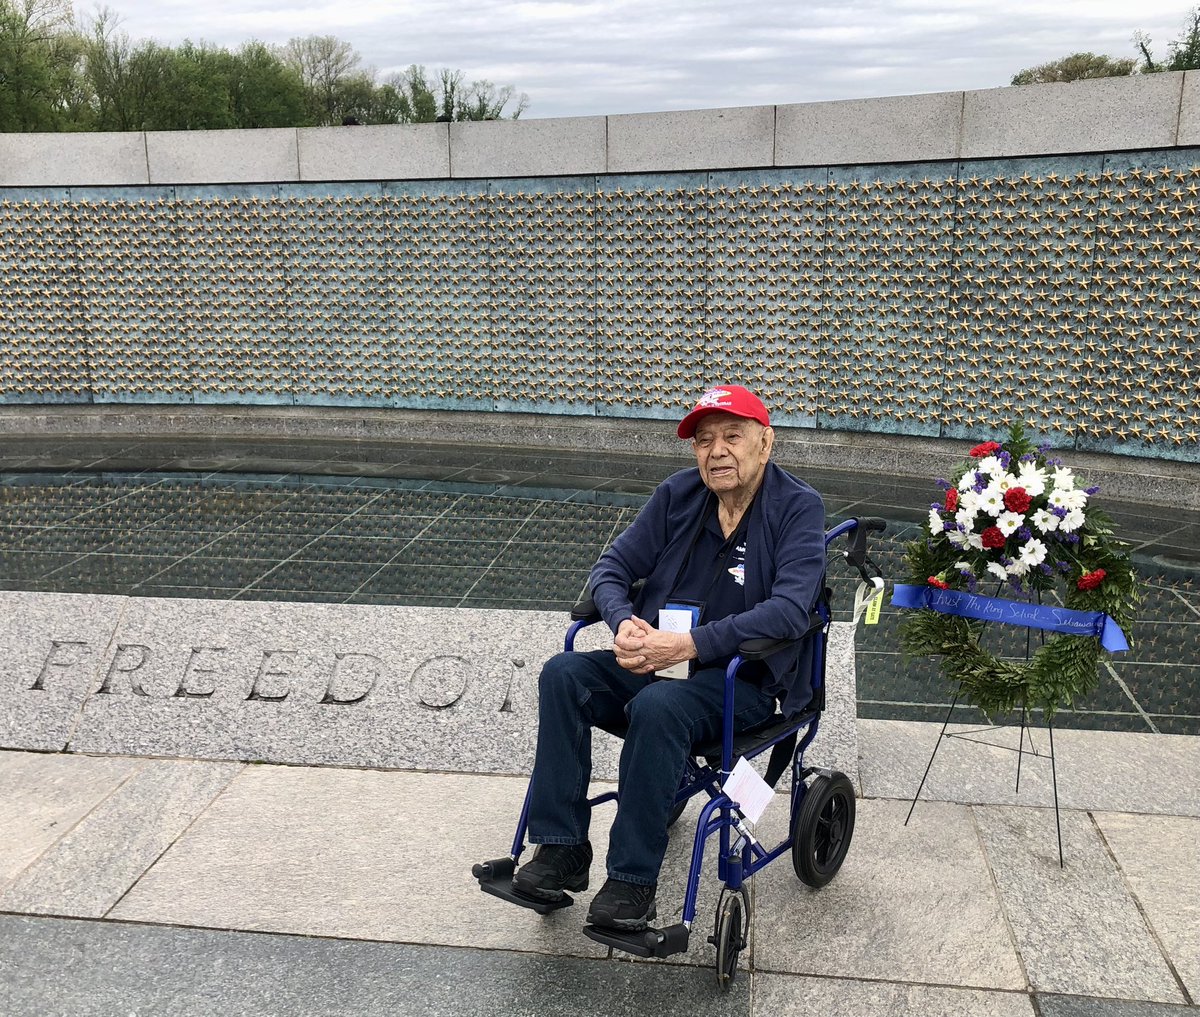 Our Honor Flight Southern Nevada coverage continues at 4pm today. We will begin telling the stories of WWII, Korean and Vietnam War veterans, as they toured memorials built for them in the Washington DC area. #honorflightsouthernnevada